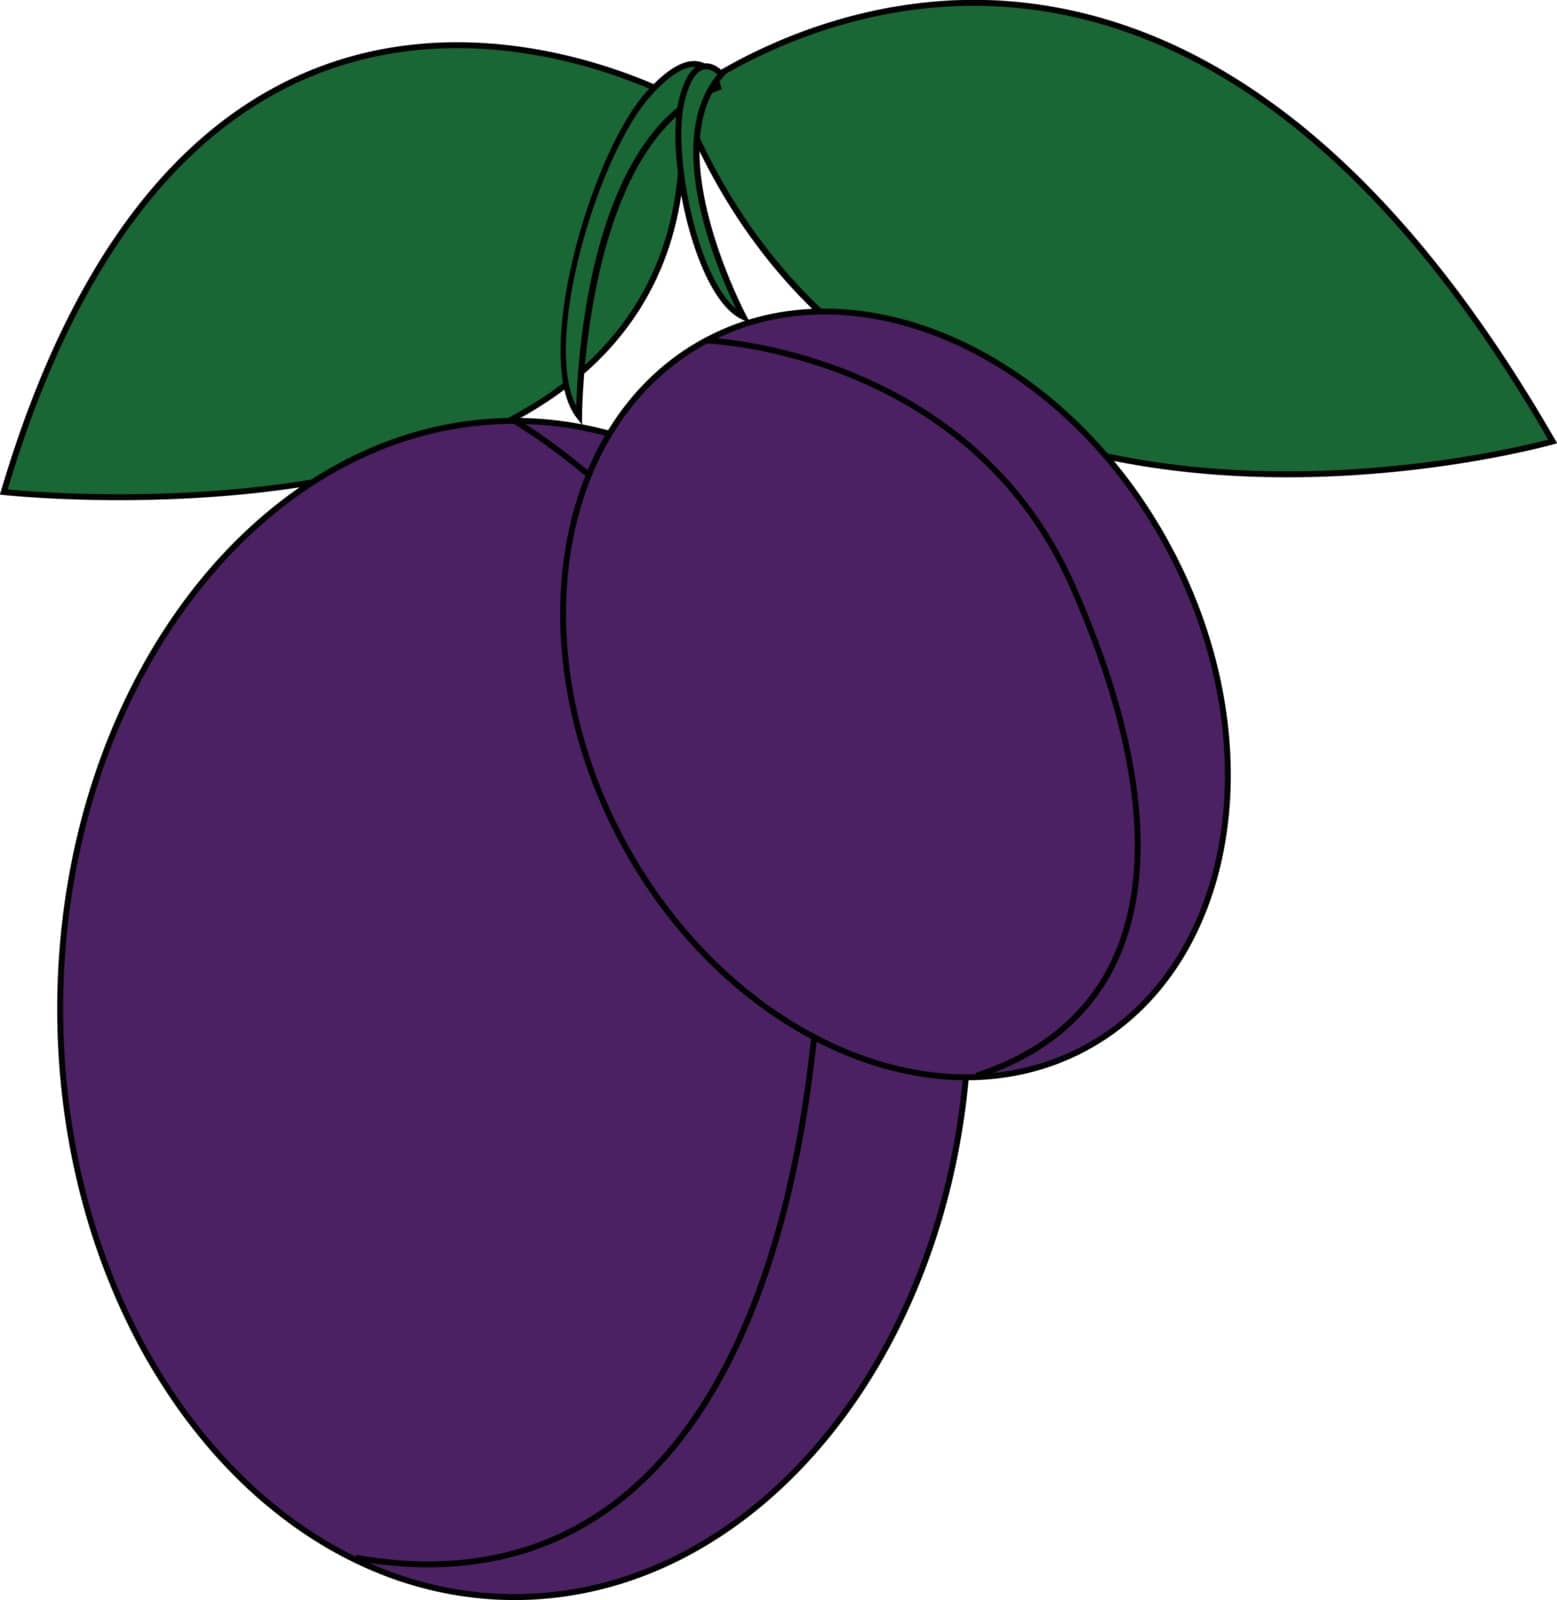 A pair of violet plumbs with green leaves vector color drawing or illustration